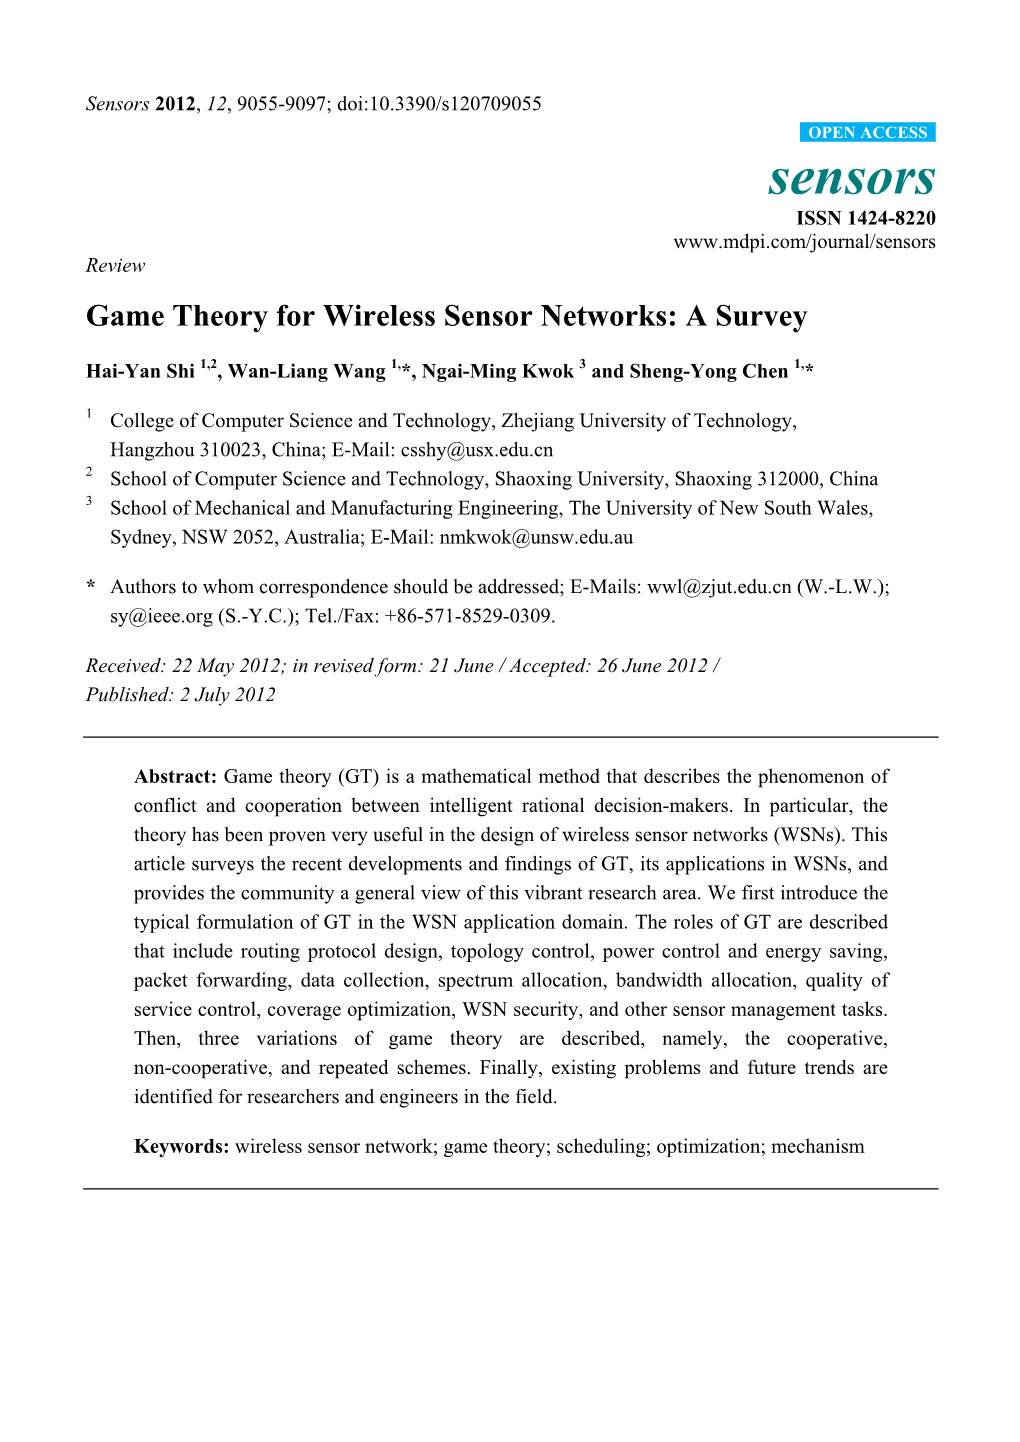 Game Theory for Wireless Sensor Networks: a Survey